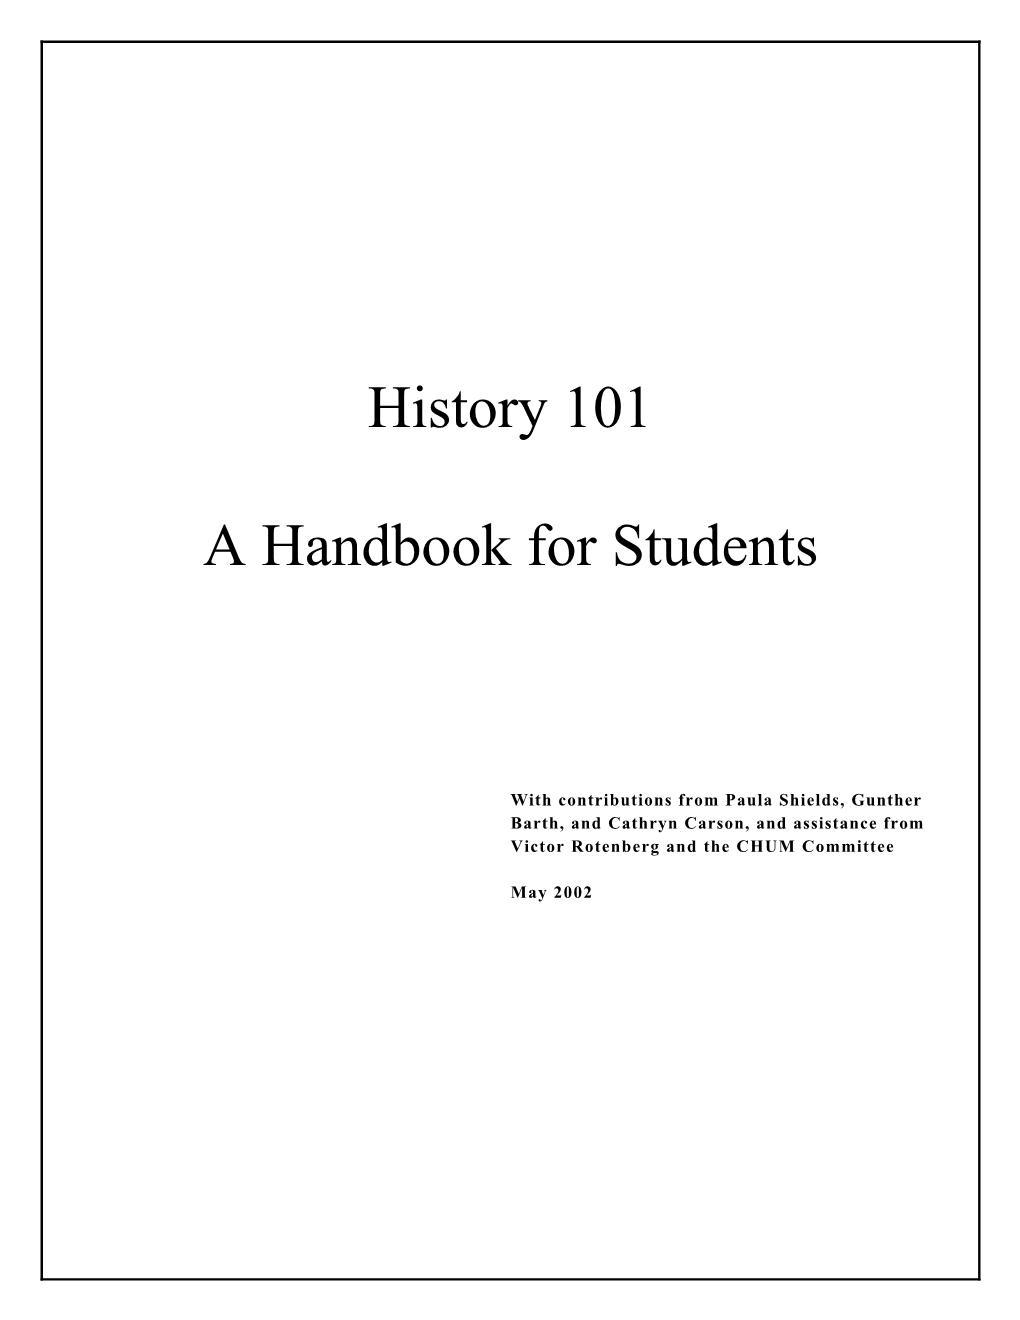 History 101 a Handbook for Students